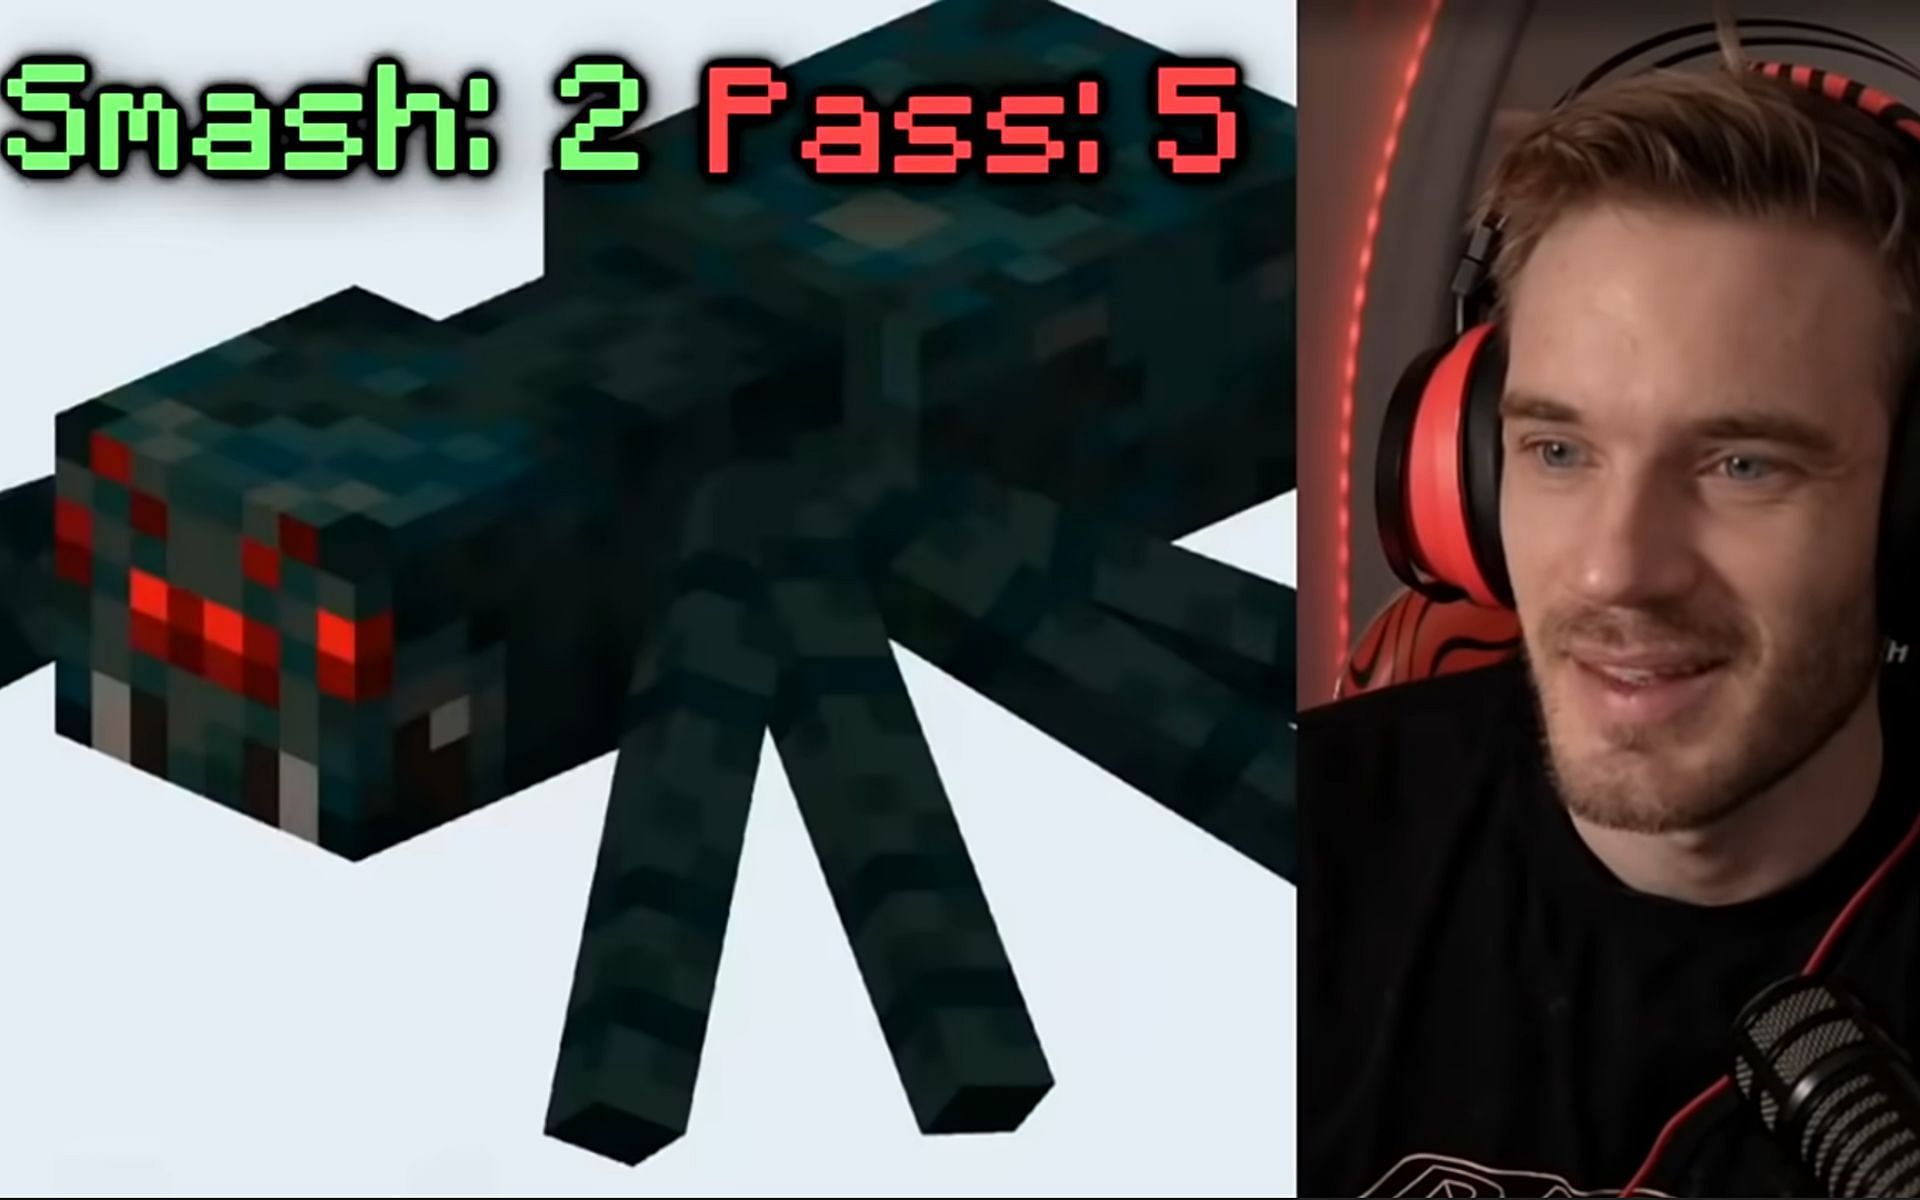 Smash or Pass video (Image via PewDiePie Highlights/YouTube)